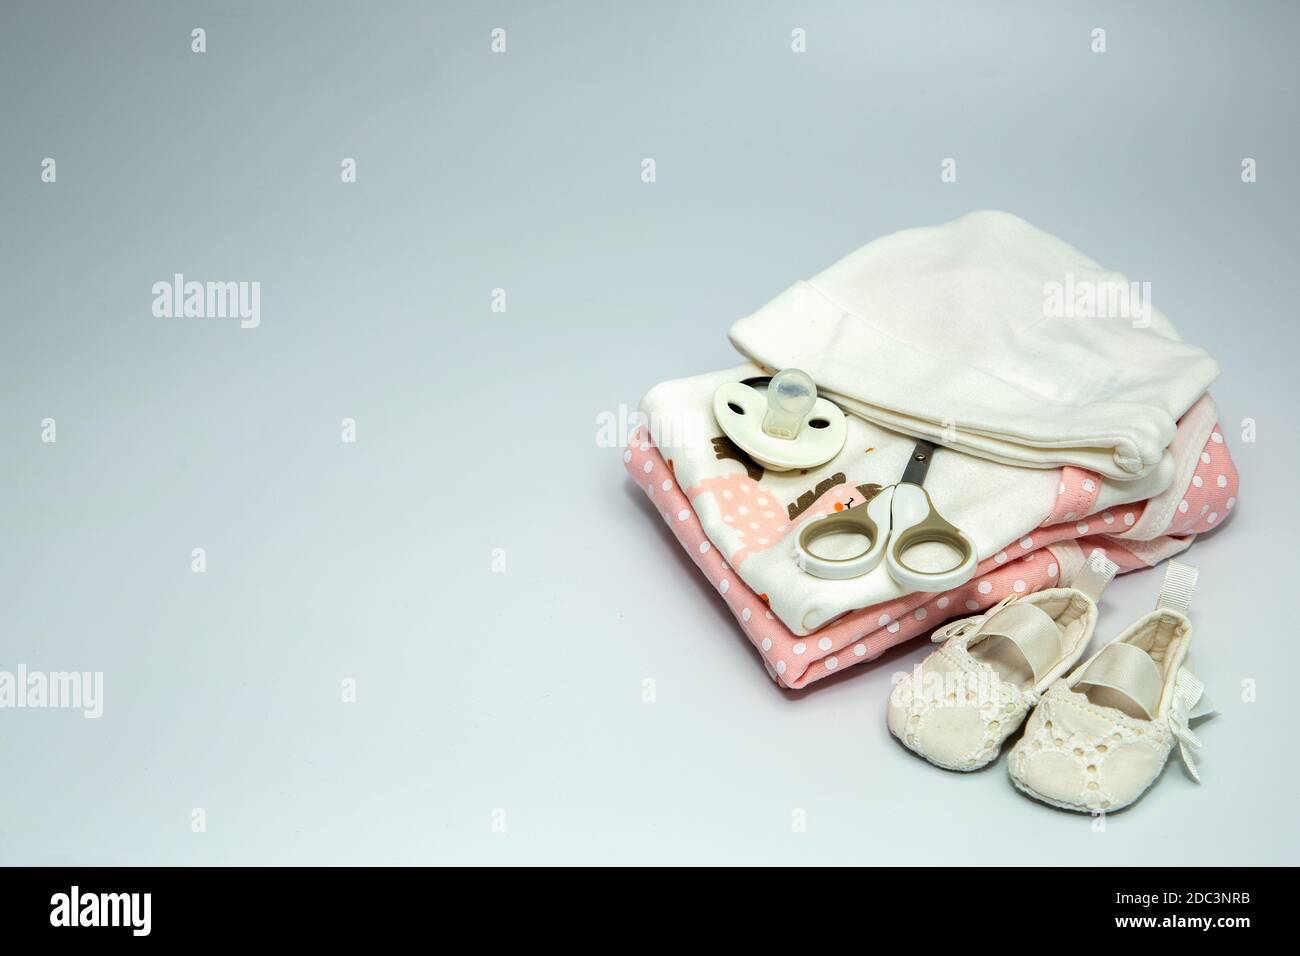 A pile of baby clothes and accessories. Stock Photo